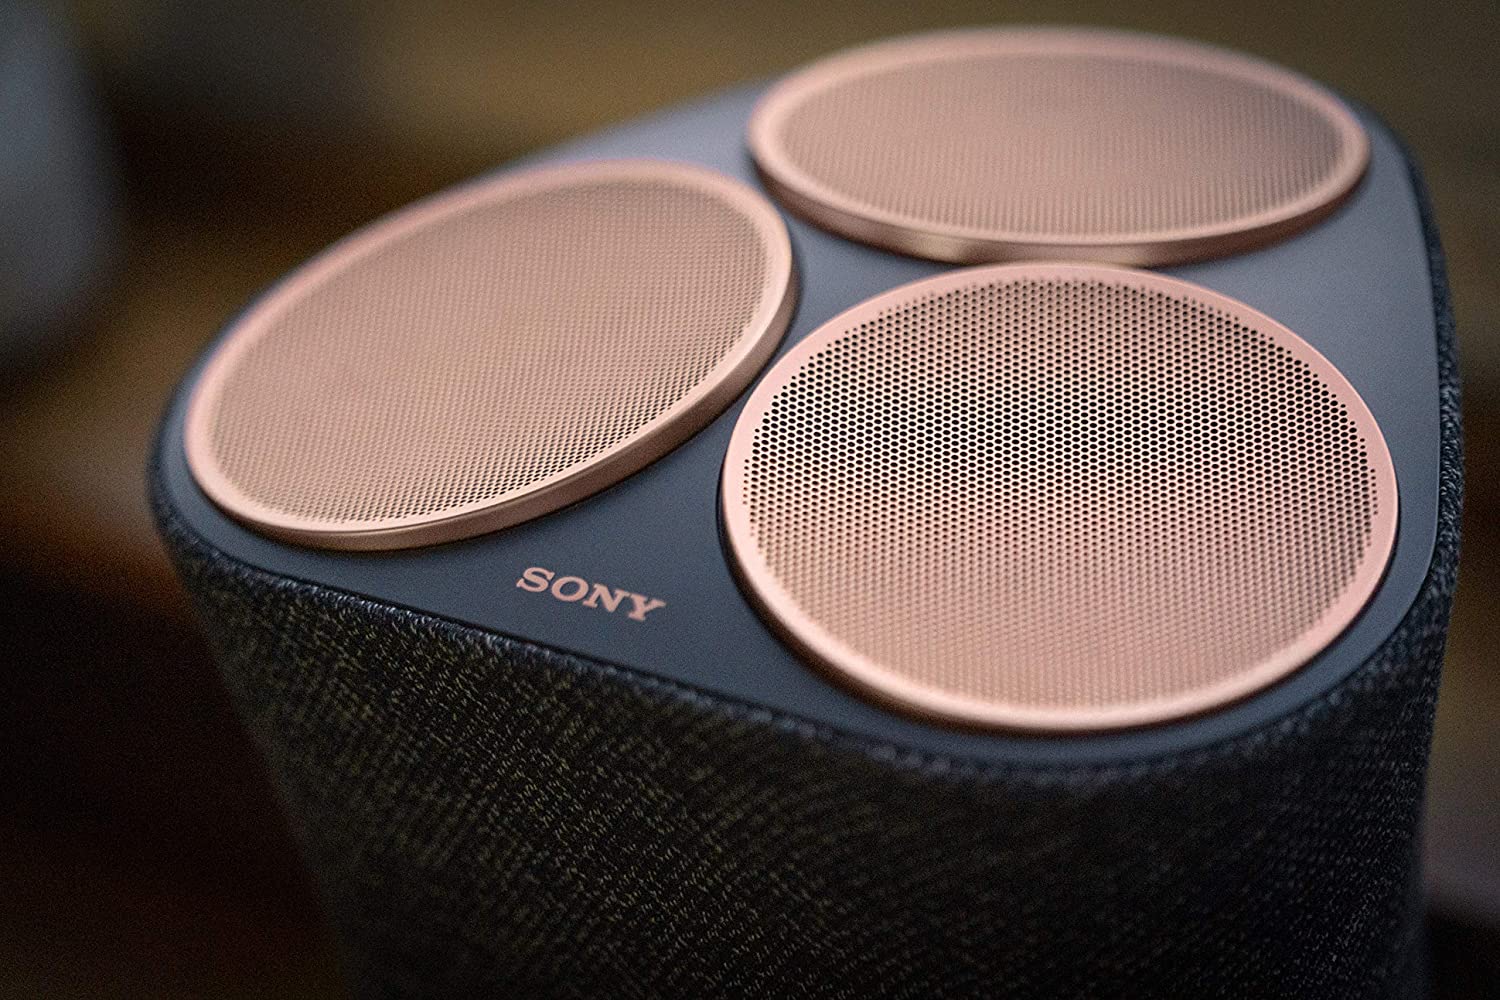 You can now preorder Sony’s mindbending new 360 Reality Audio speaker